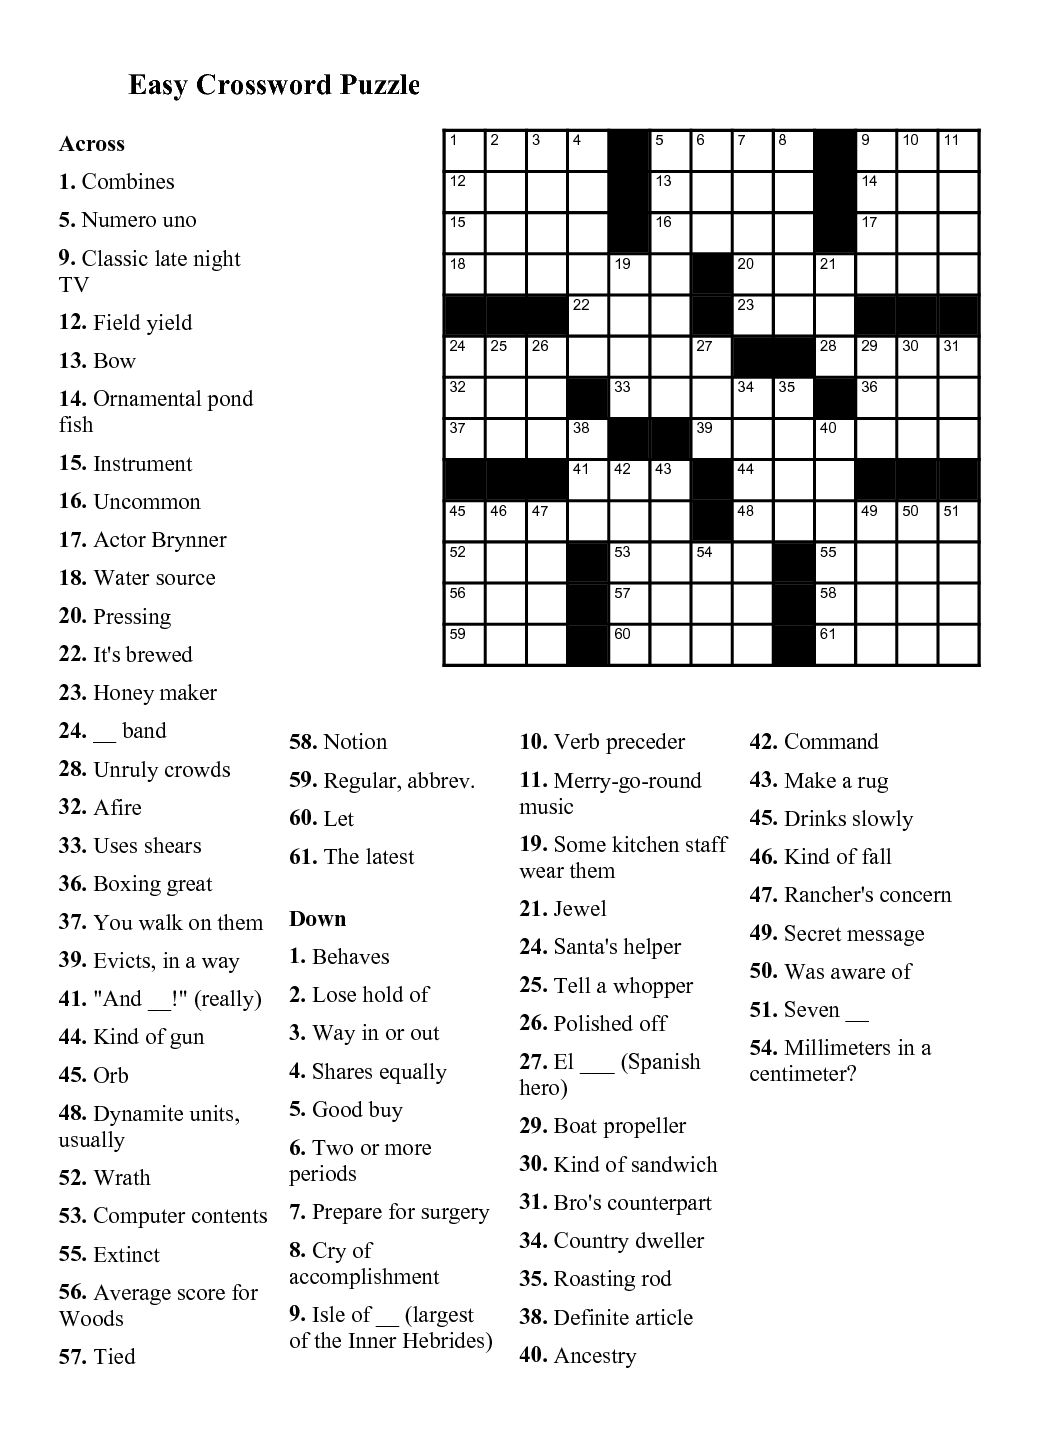 How To Make A Crossword Puzzle Free Printable Printable Crossword Puzzles